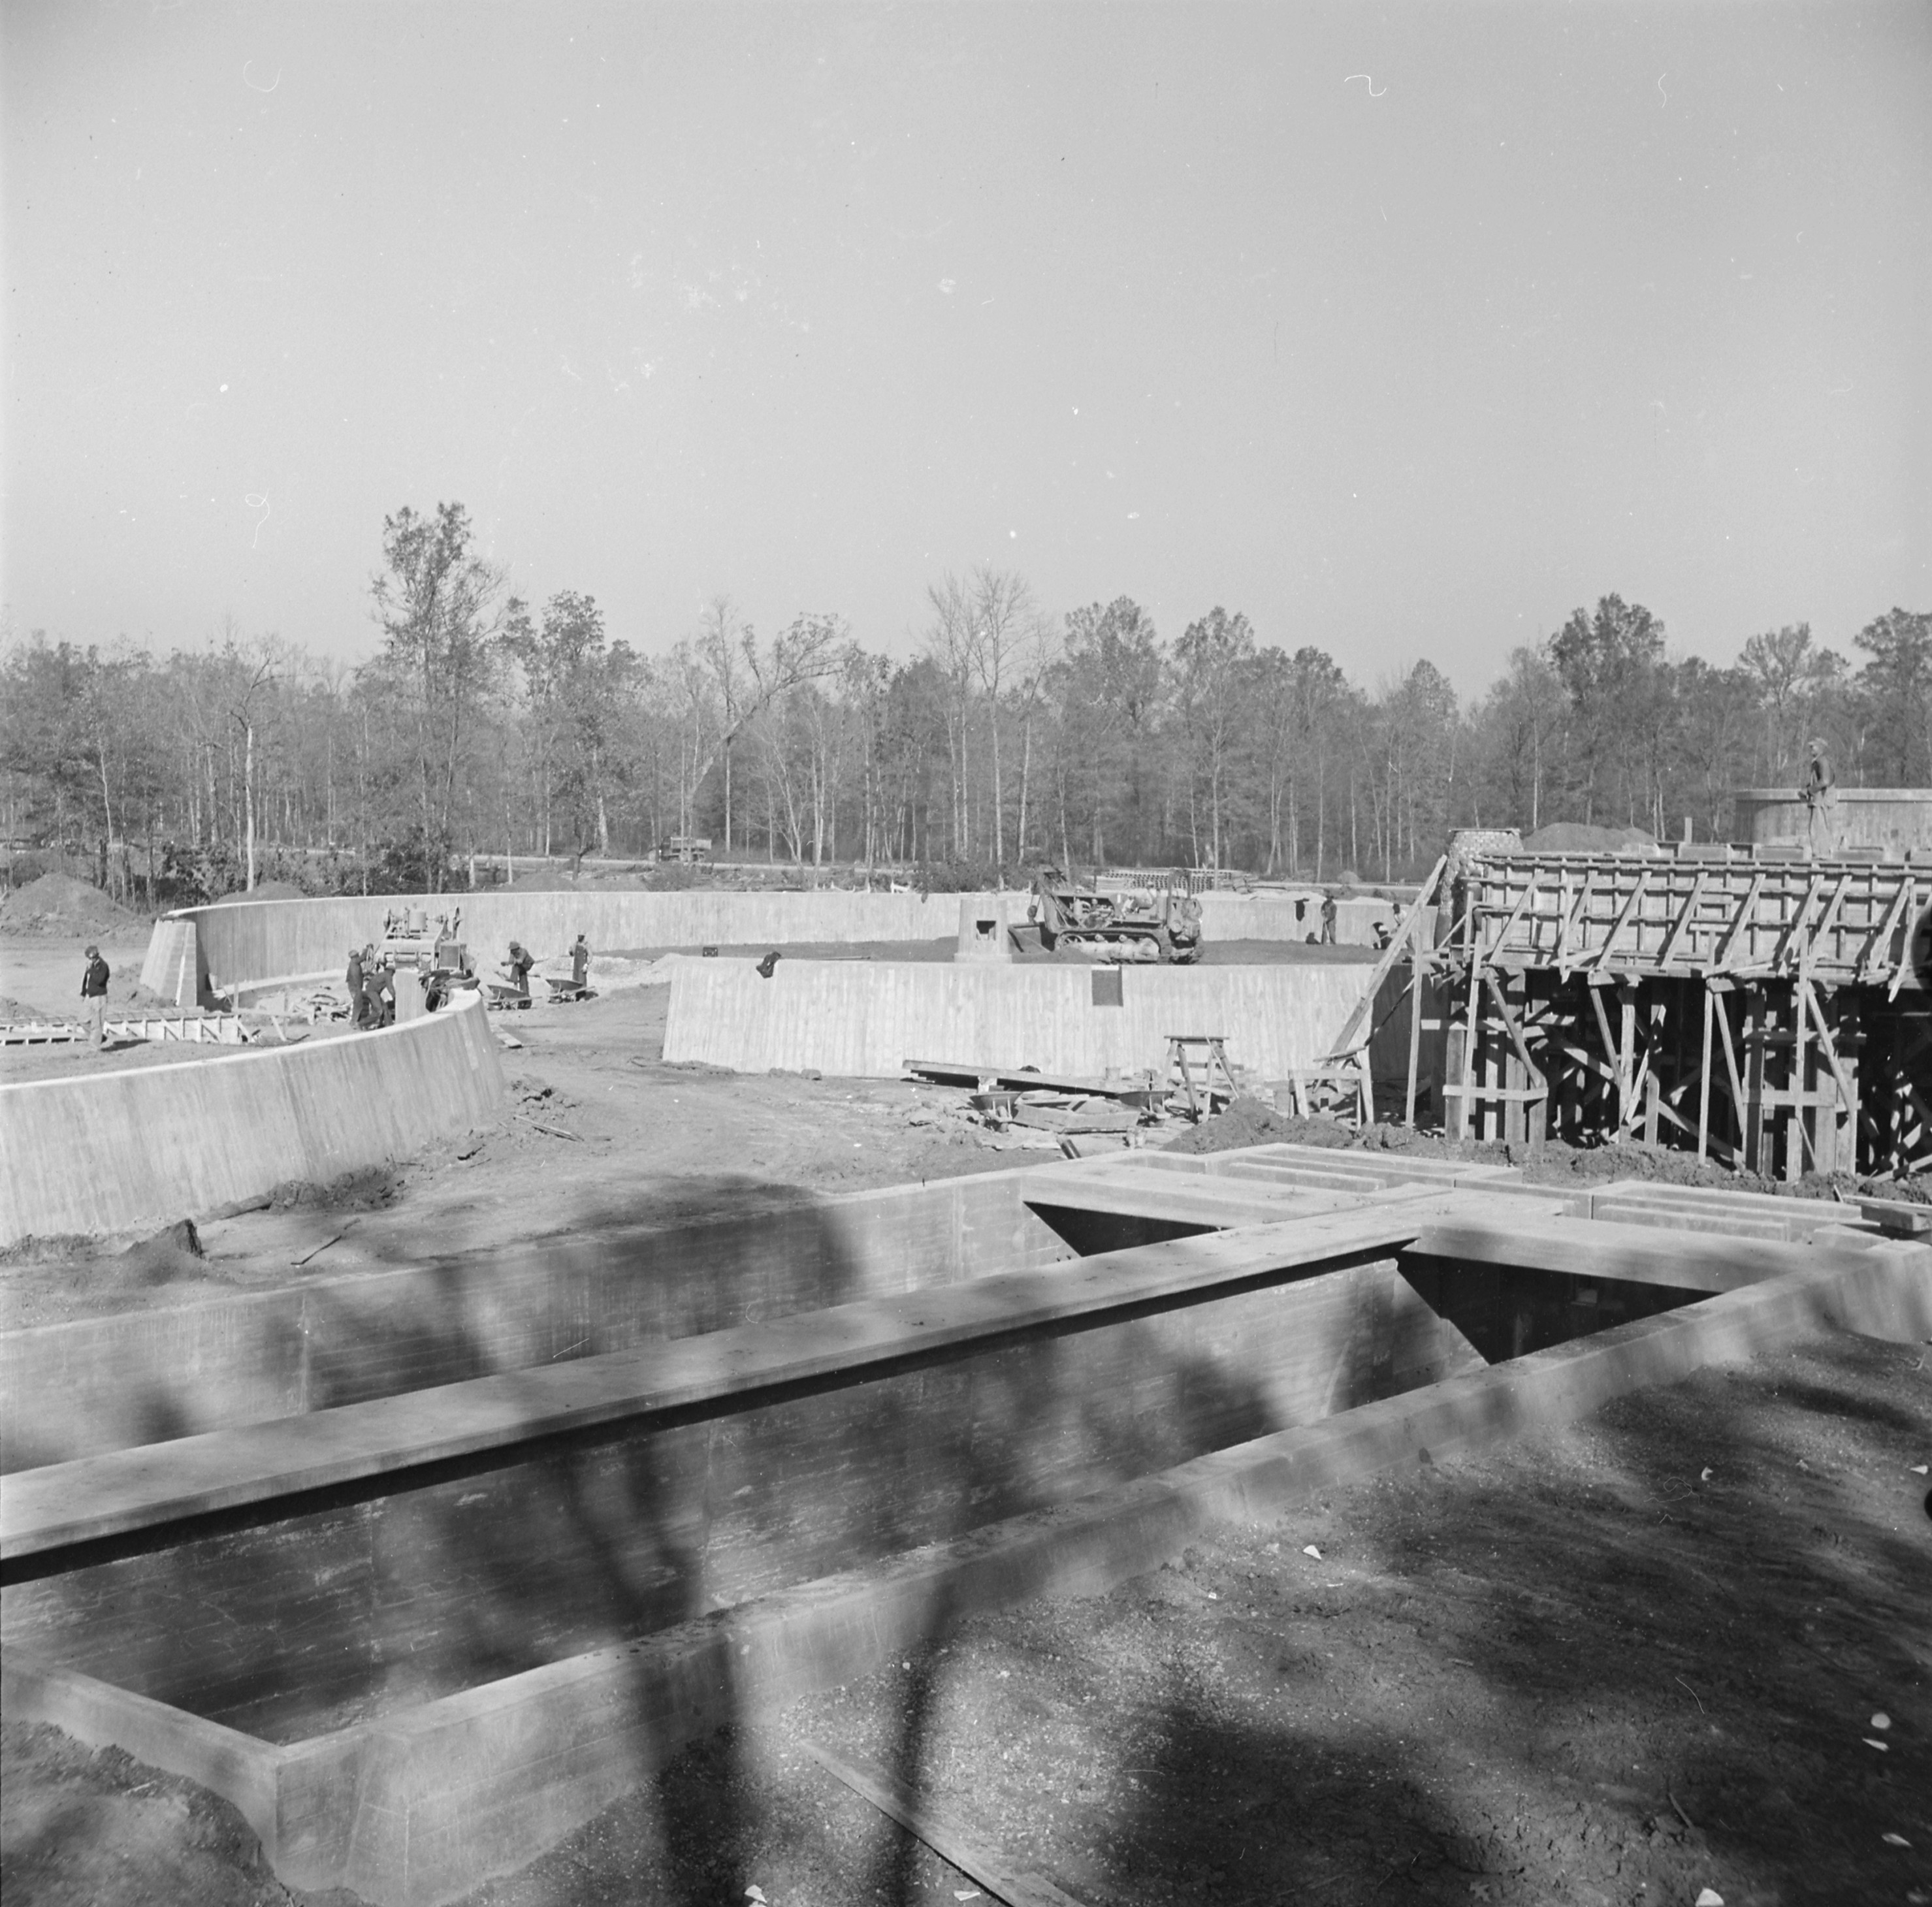 Construction of the sewage disposal plant at Jerome War Relocation Center, Arkansas, United States, 14 Nov 1942, photo 4 of 5